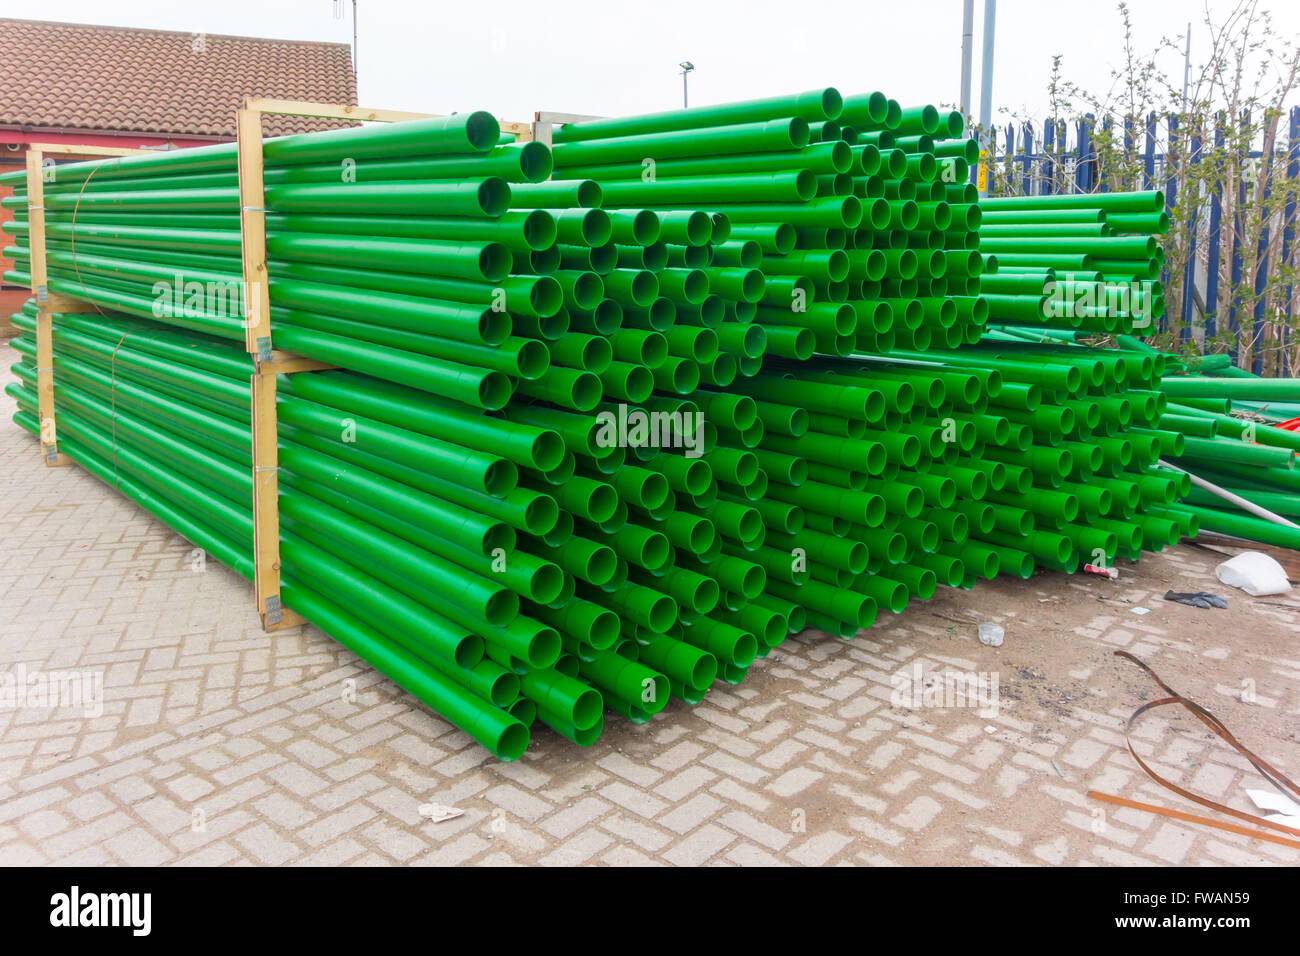 Green plastic pipe with spigot and socket joints delivered in quantity to a work site Stock Photo